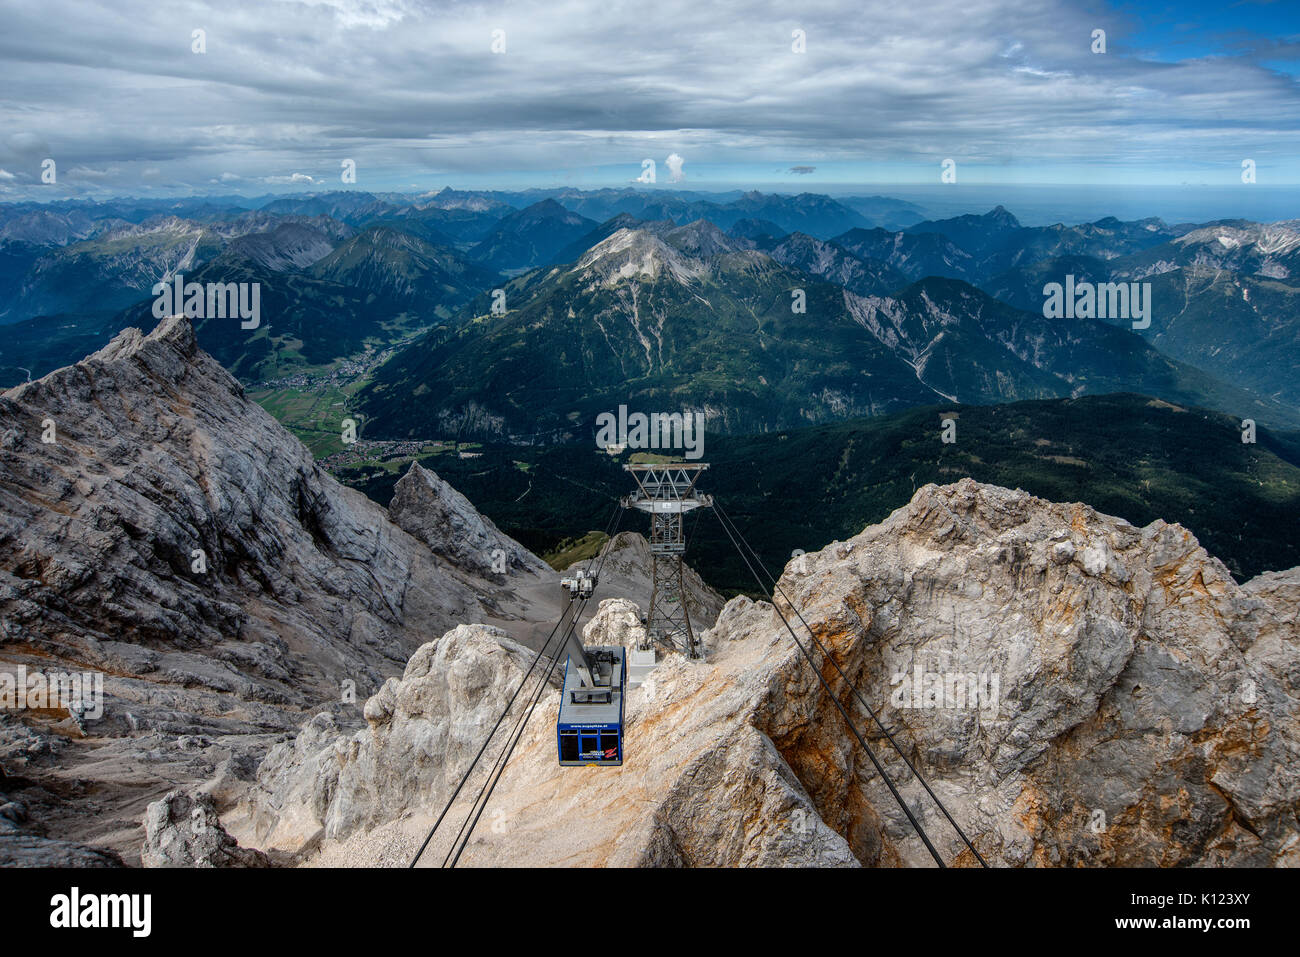 The Tyrolean Zugspitze Cable Car arrives at the summit of the Zugspitze mountain on the German-Austrian border. Stock Photo